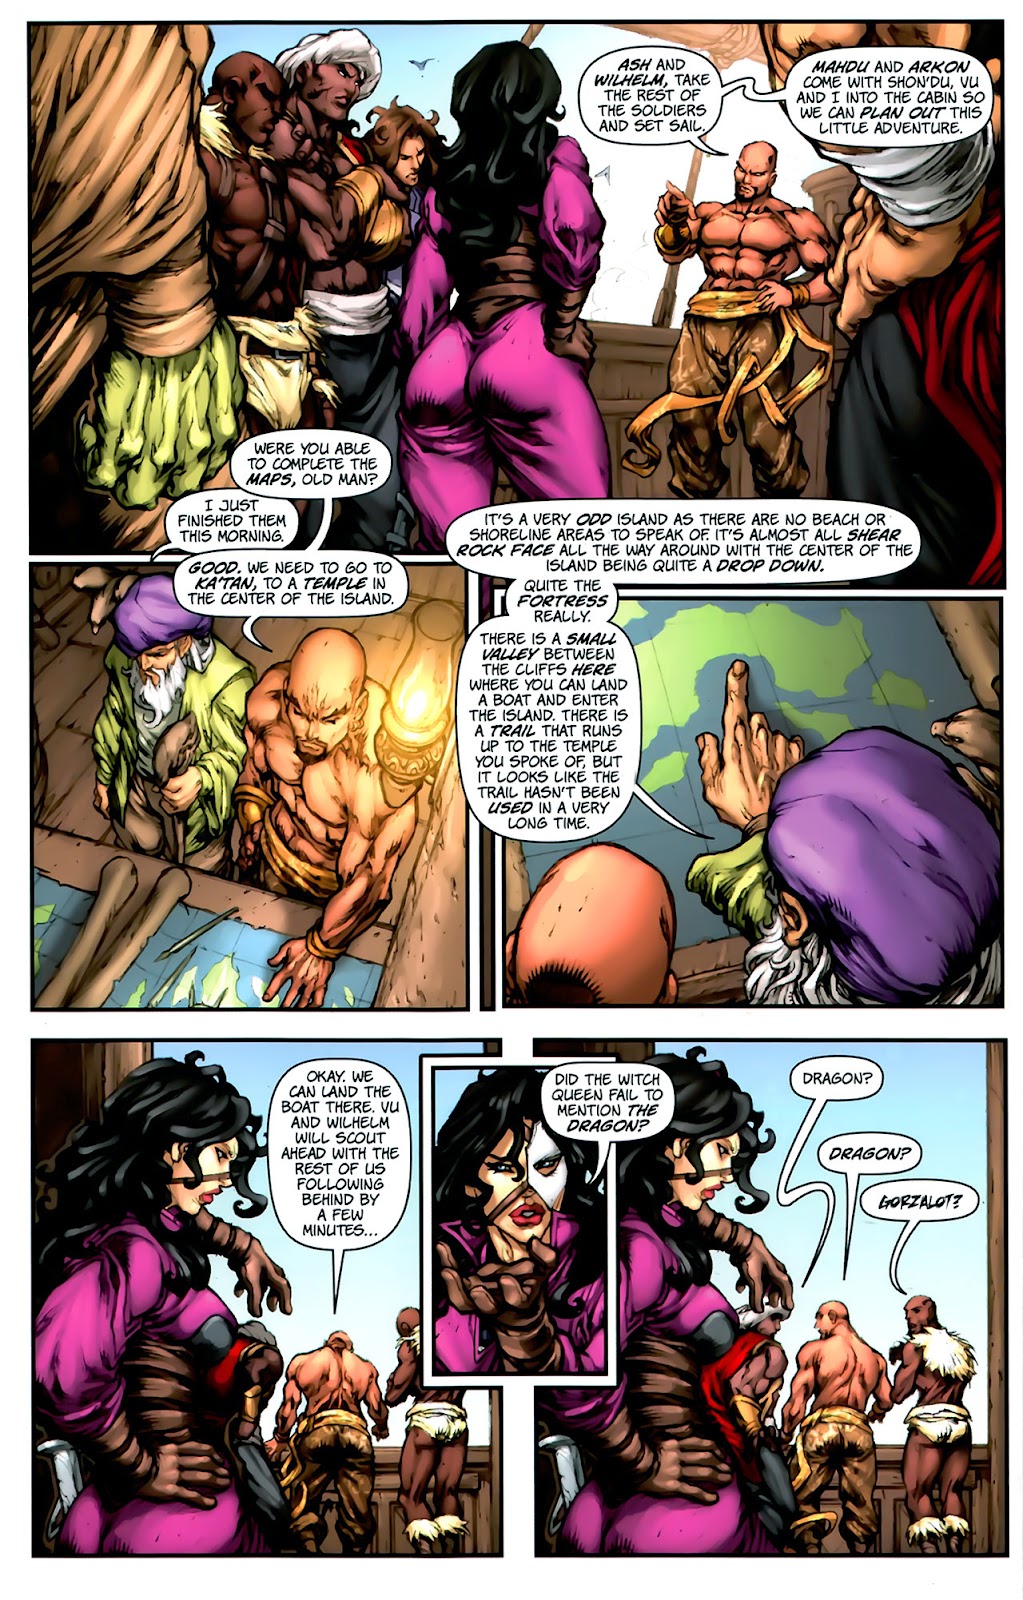 1001 Arabian Nights: The Adventures of Sinbad issue 2 - Page 19